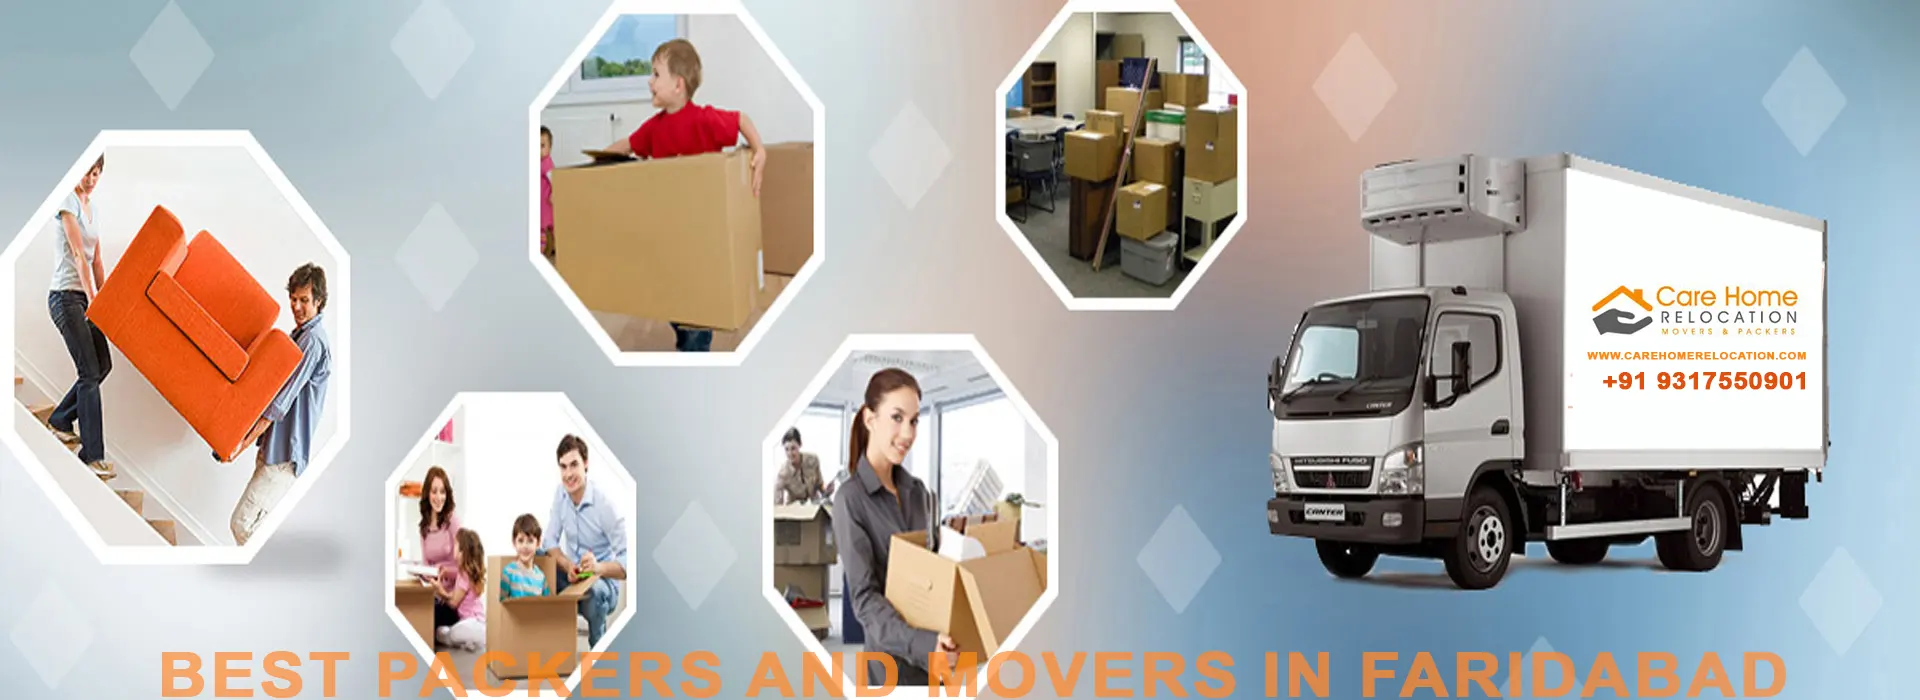 packers and movers in faridabad